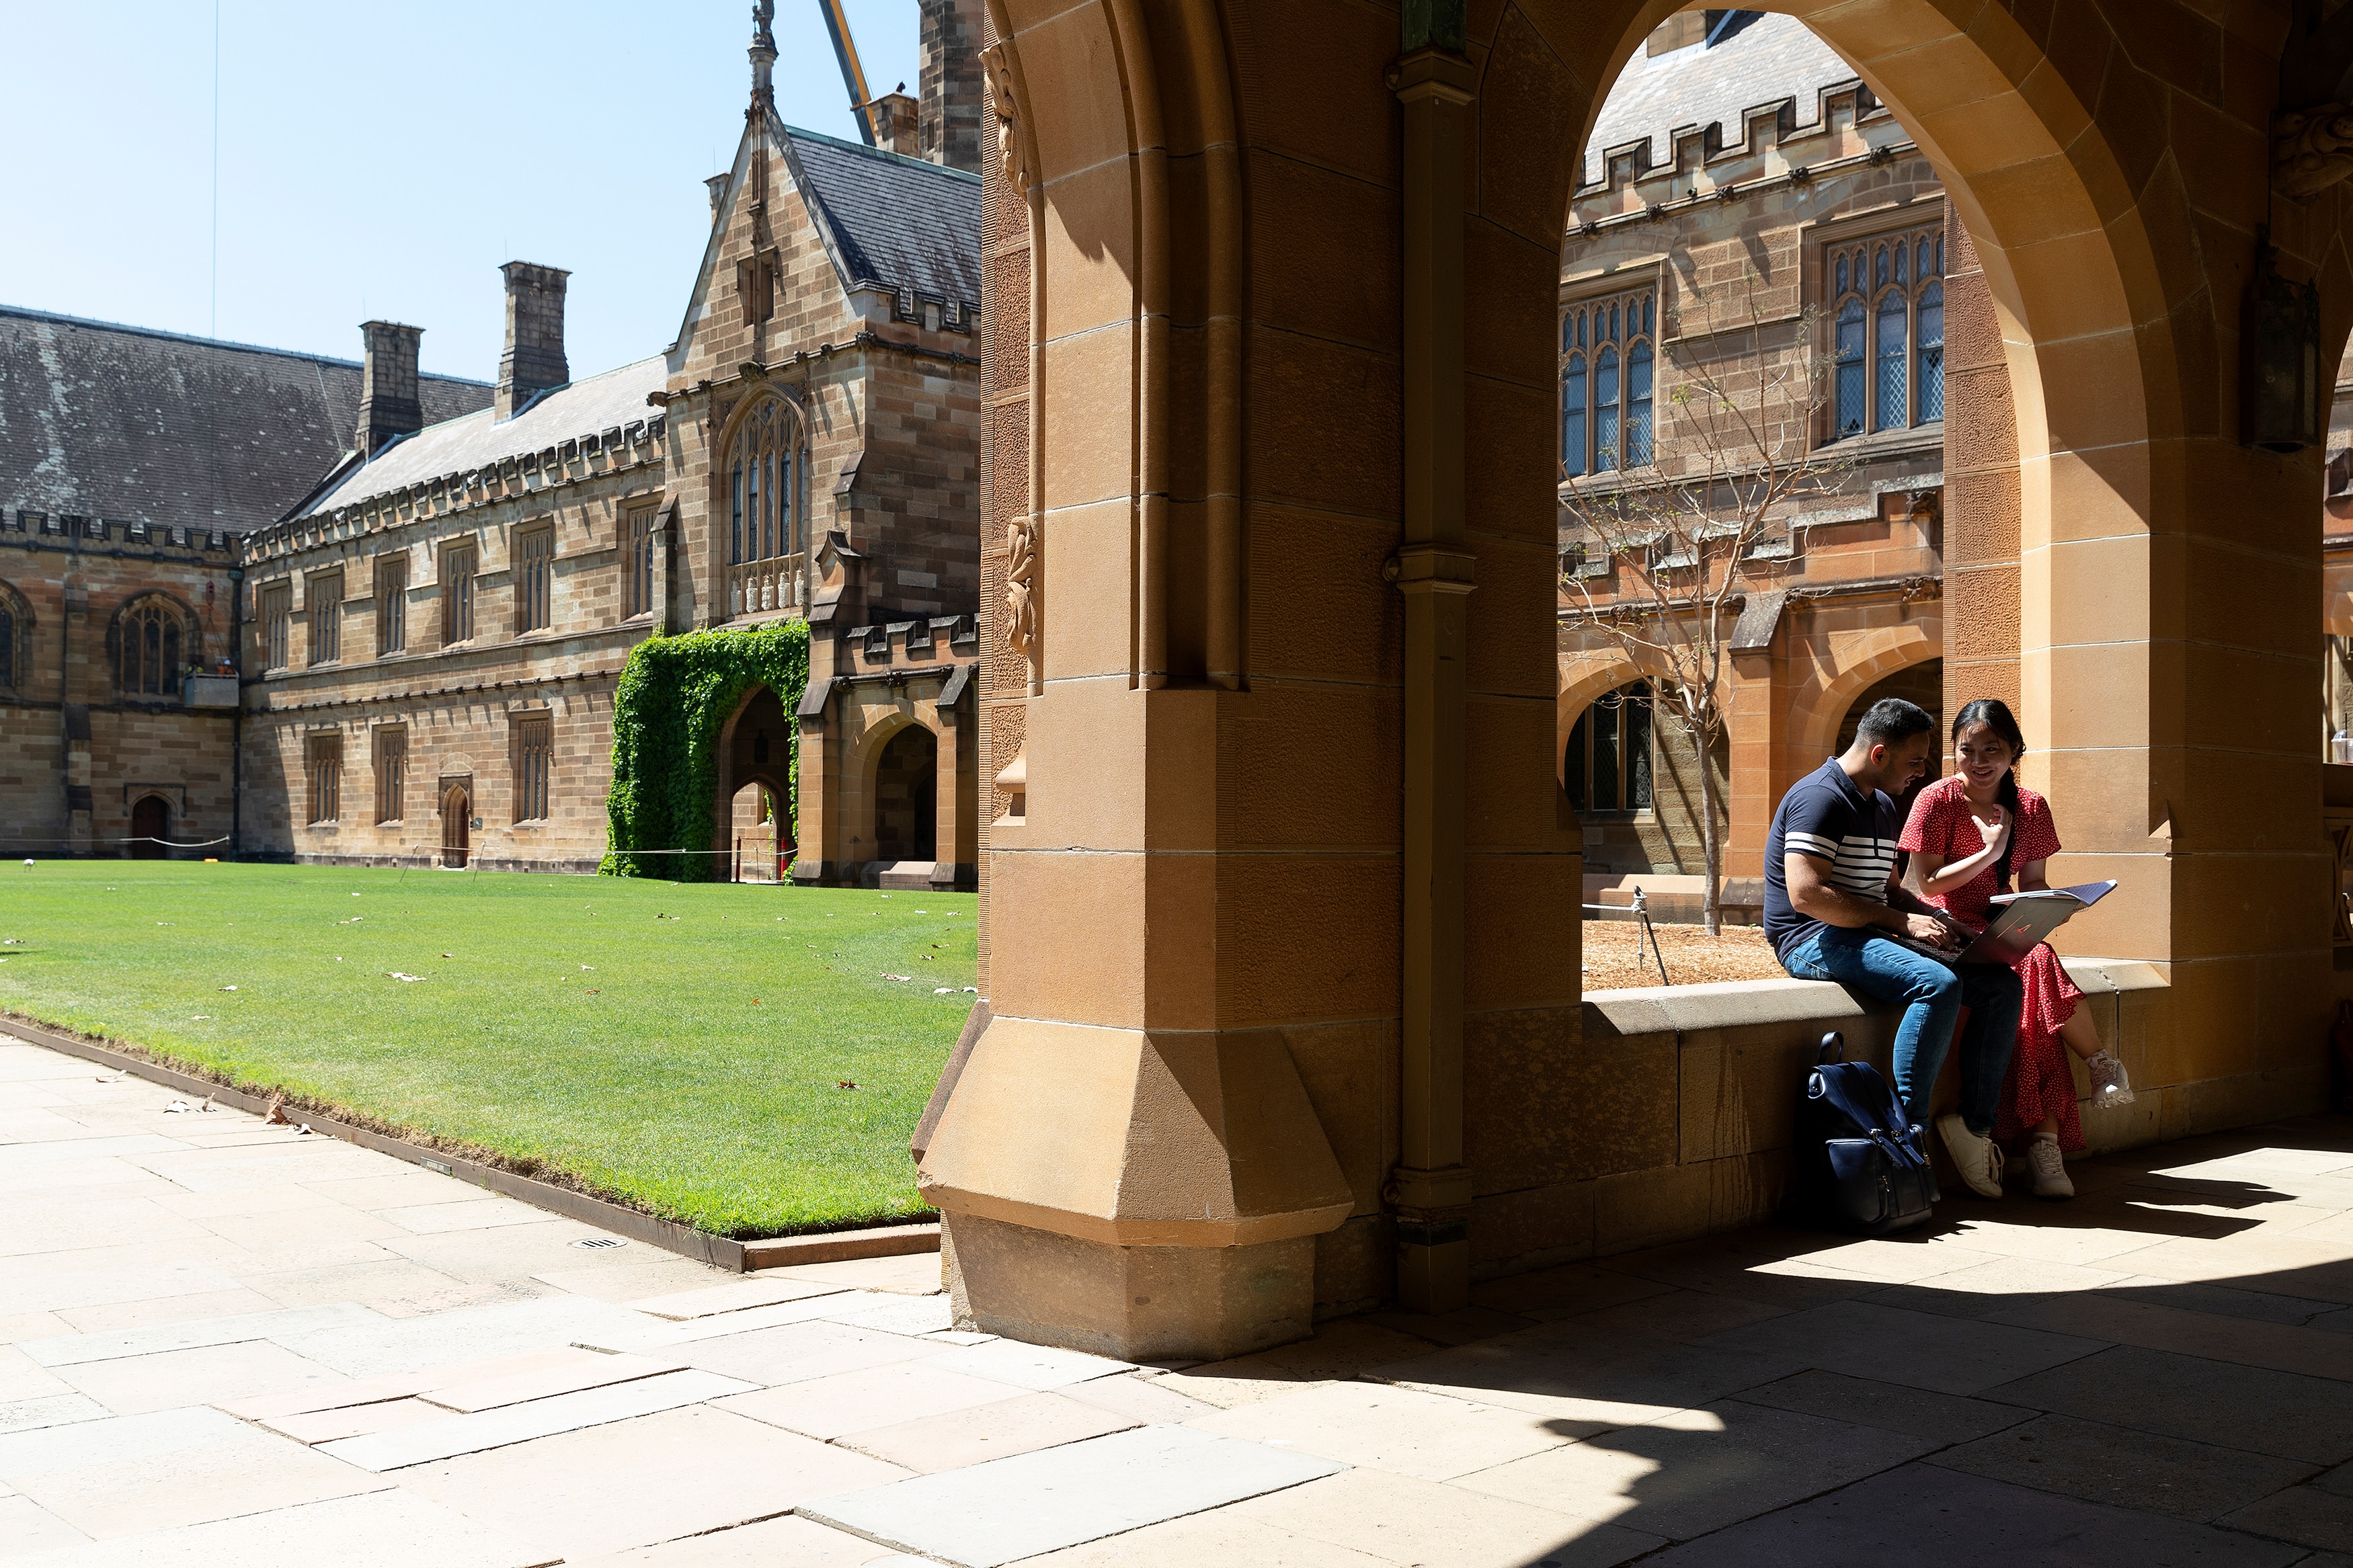 A young man and a young woman sit together under a sandstone archway in the University of Sydney Quad